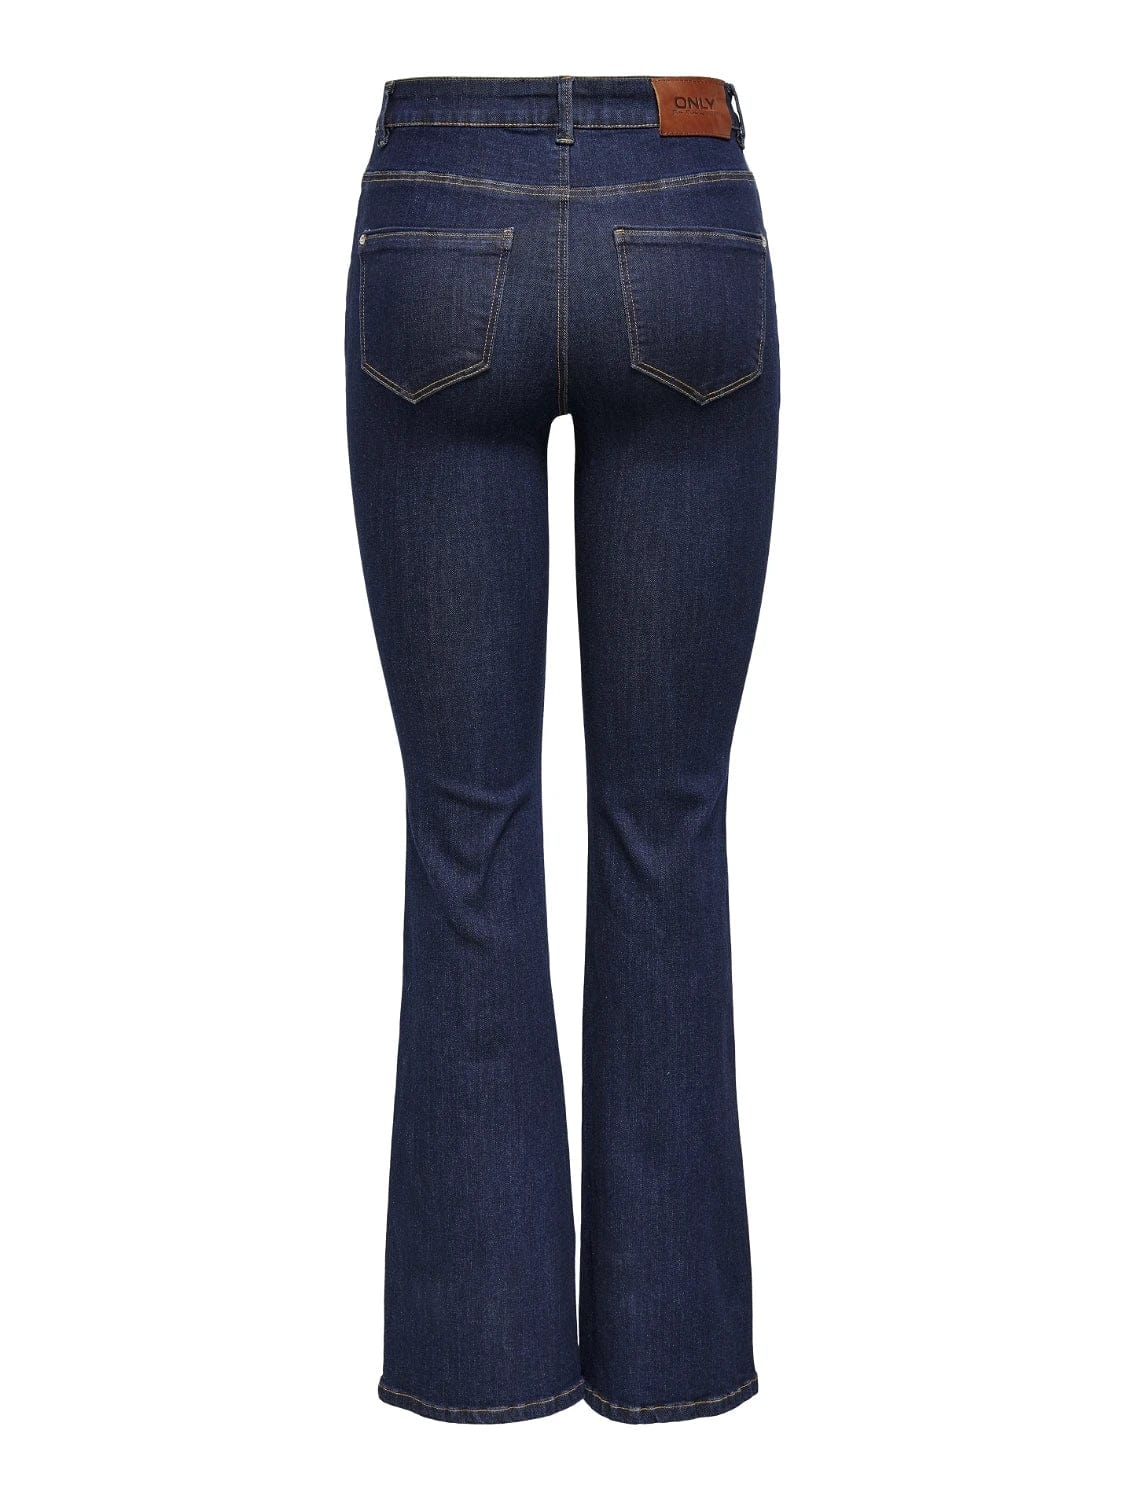 ONLY High Waisted Flared Rinse Denim Jeans